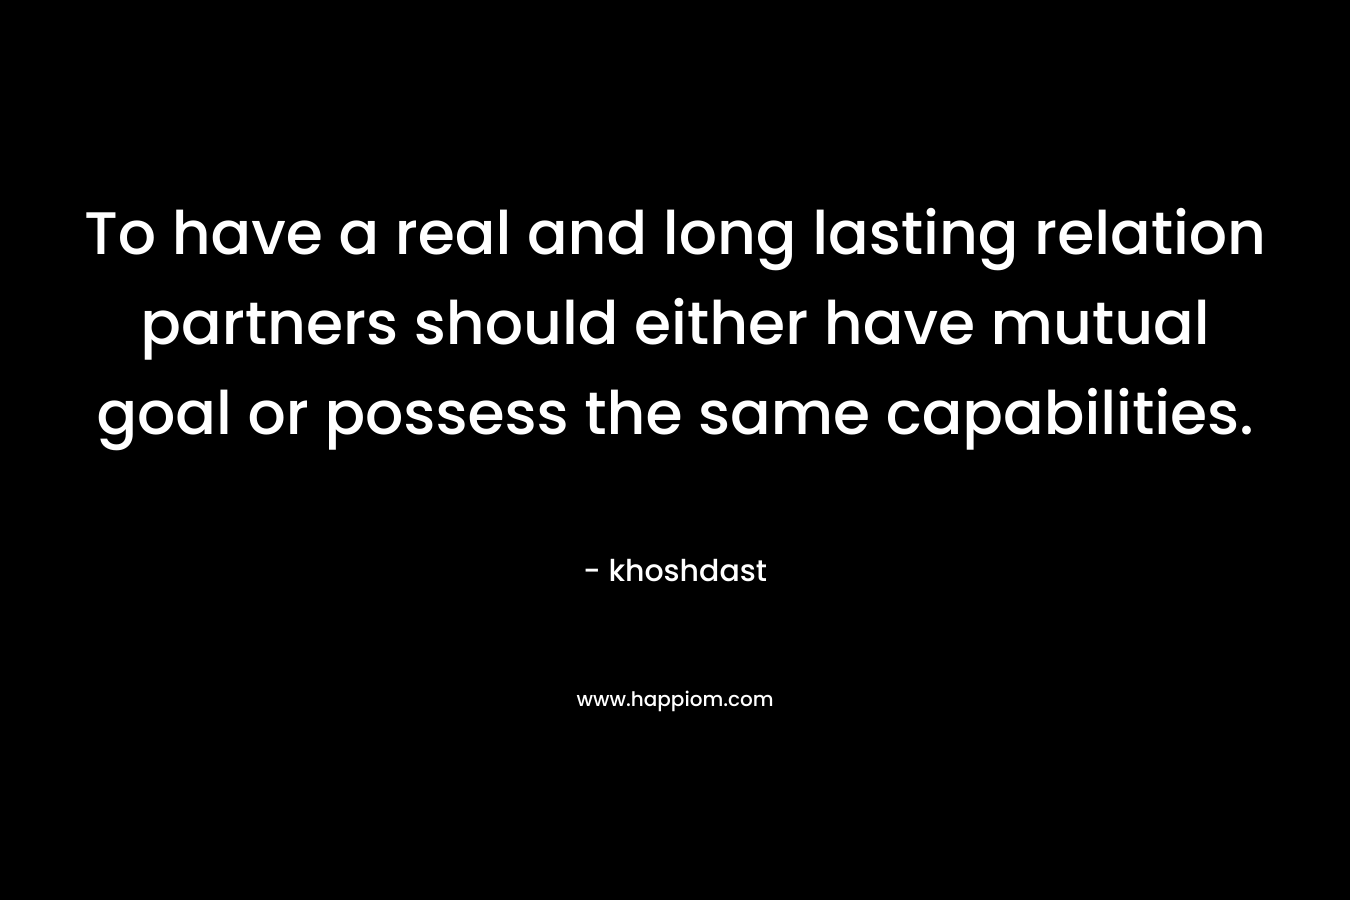 To have a real and long lasting relation partners should either have mutual goal or possess the same capabilities. – khoshdast